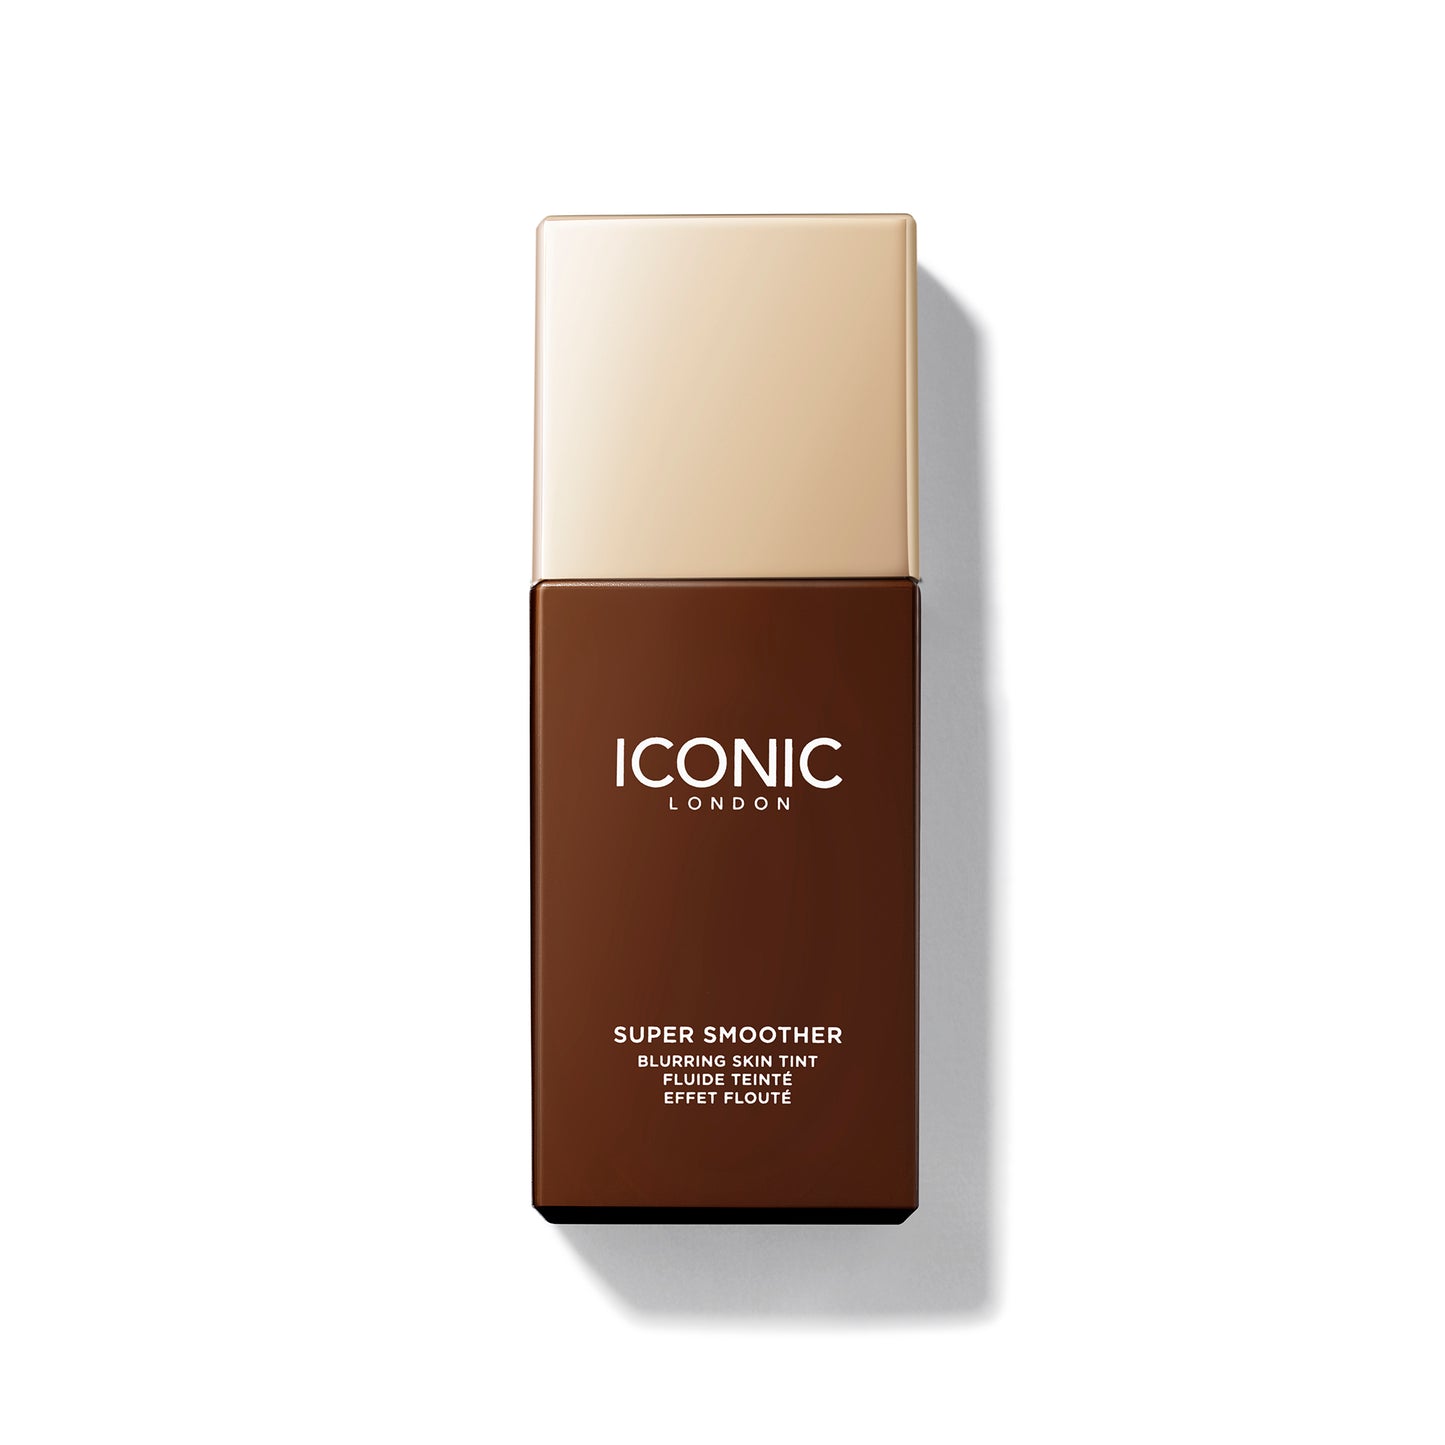 Super Smoother Blurring Skin Tint - ICONIC LONDON